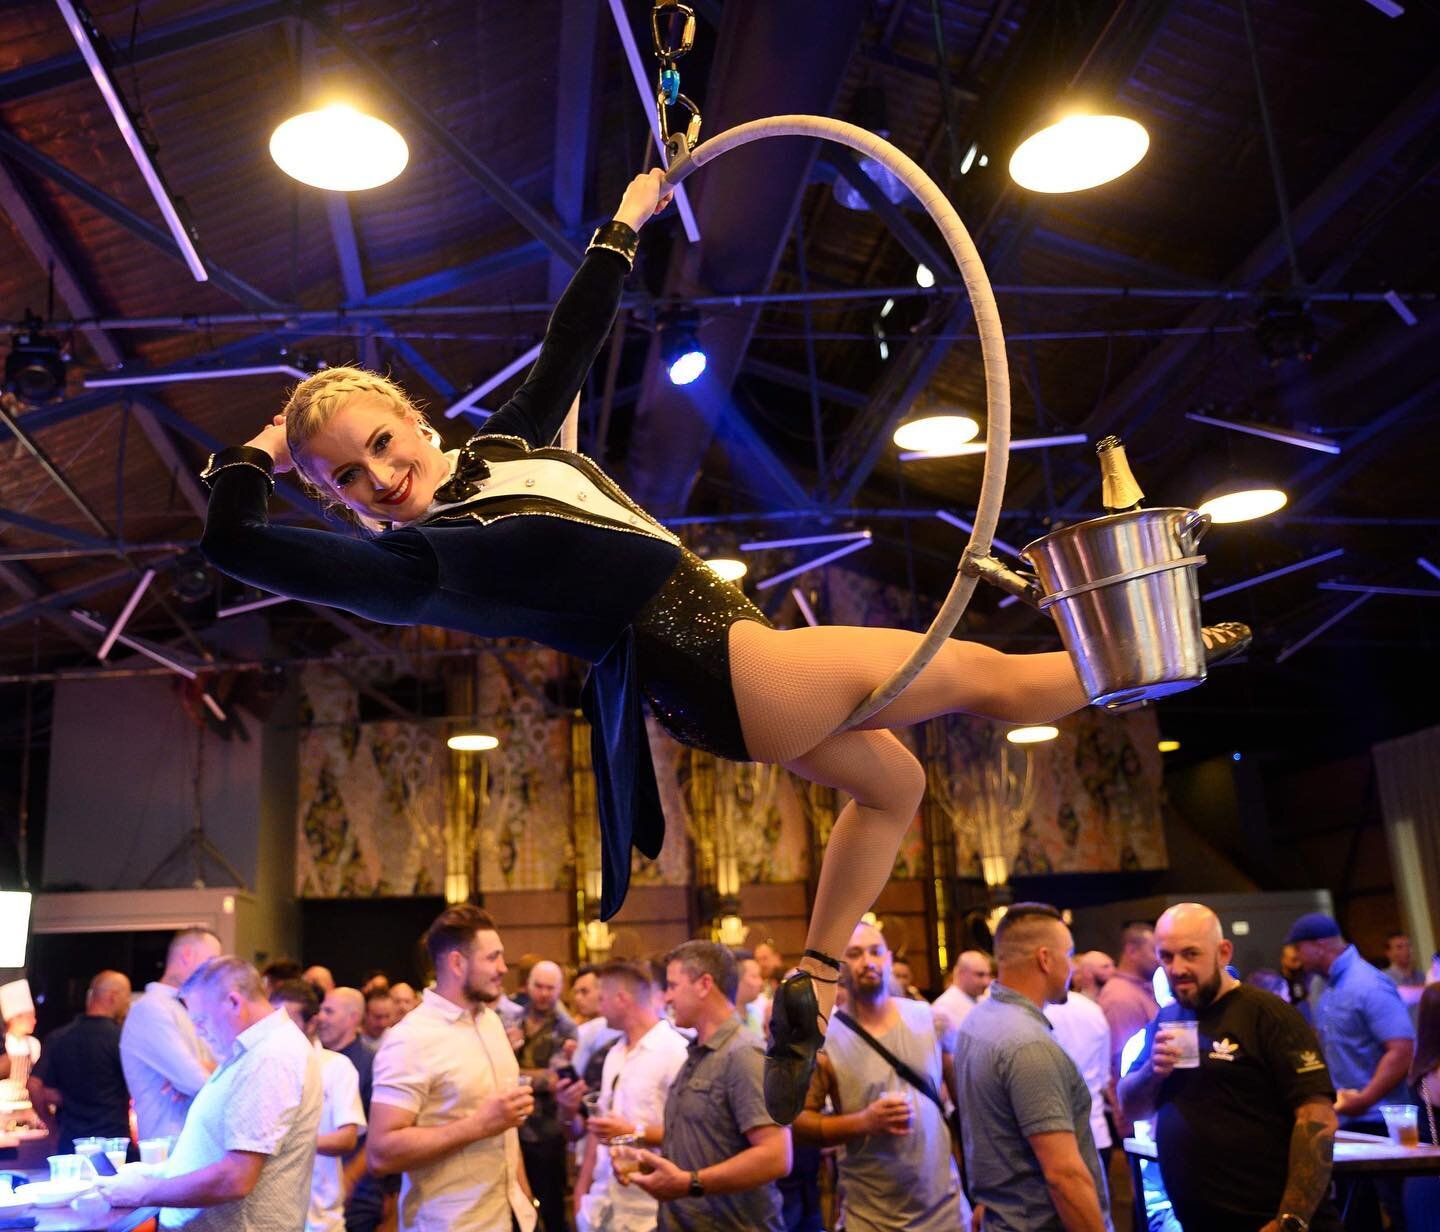 .
May all your joys be pure joys,
And all your pain champagne 🥂💋
.
.
Are Champagne Aerial Waiters are ready to spread some joy at your next event 🥂 Get in touch with us today! 
.
#avionaerialentertainment #avionaerialarts #aerialist #aerialarts #c